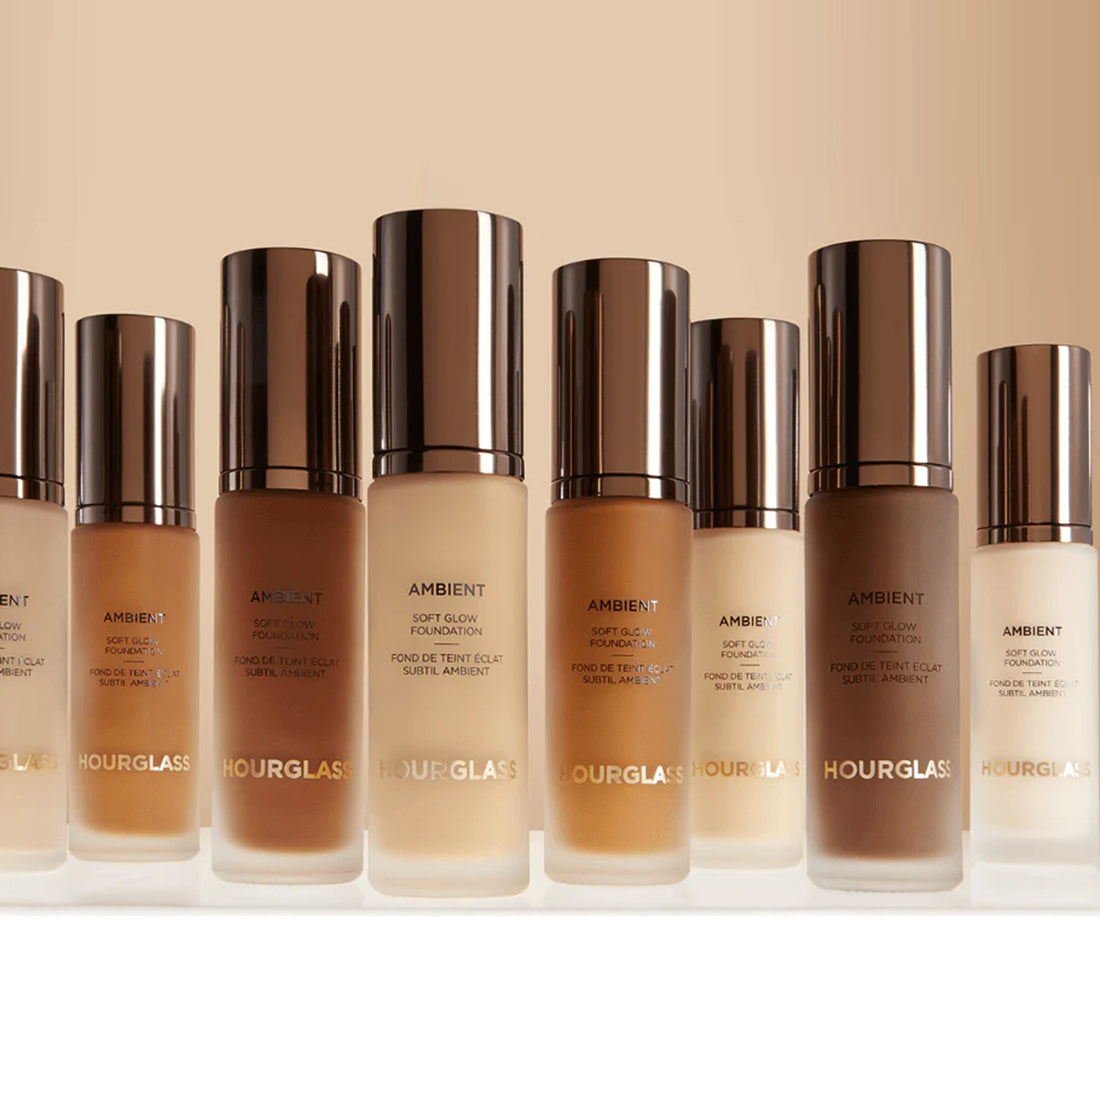 Ambient™ Soft Glow Foundation